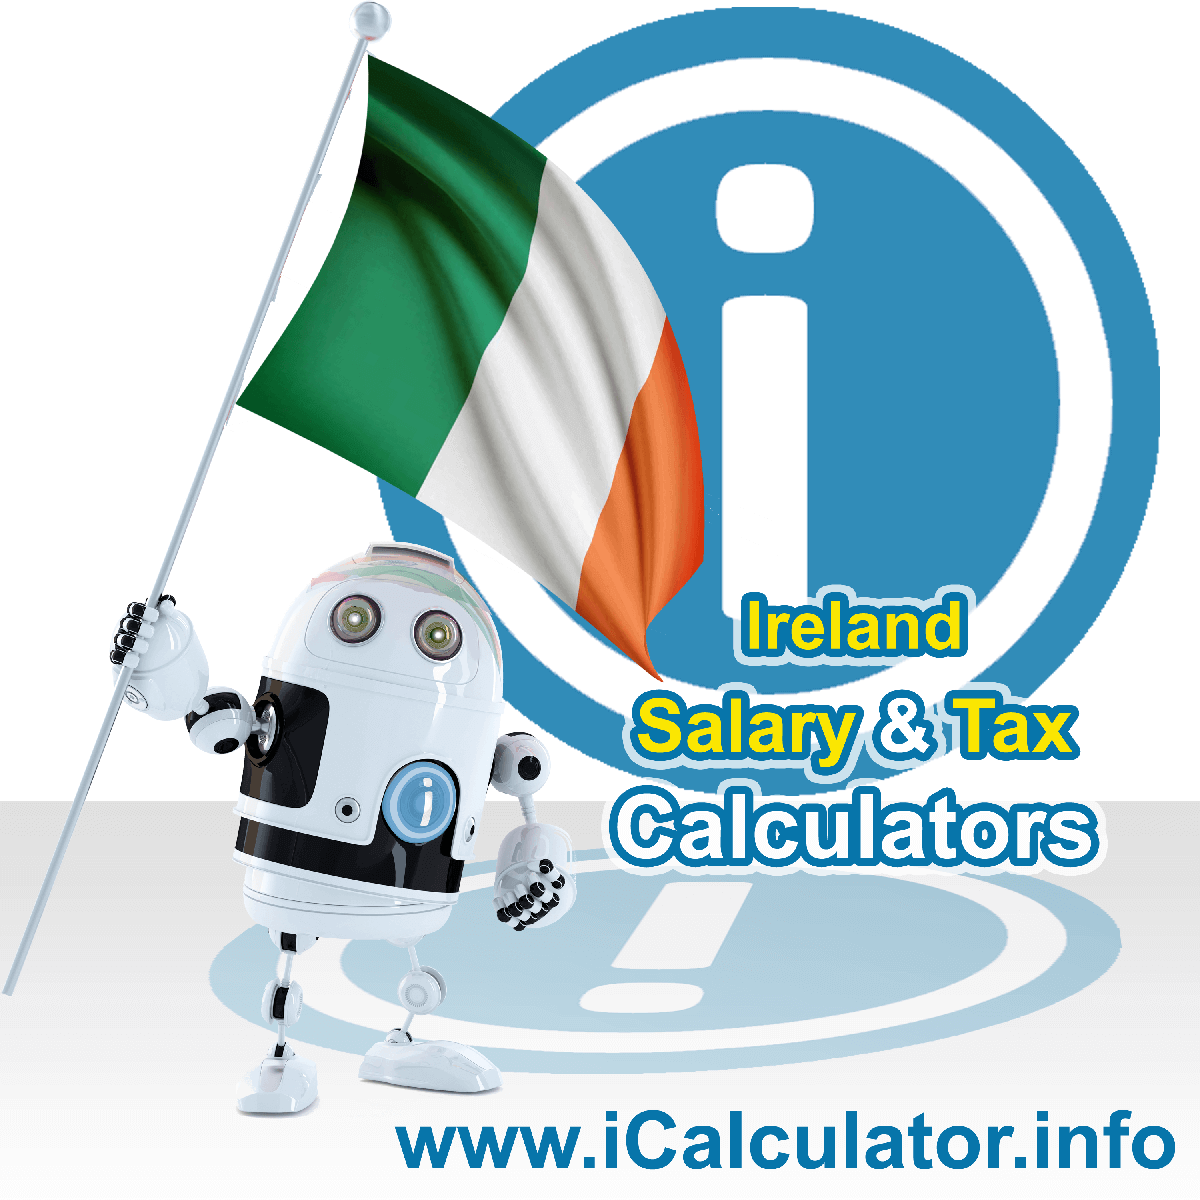 Ireland Salary Calculator. This image shows the Irelandese flag and information relating to the tax formula for the Ireland Tax Calculator